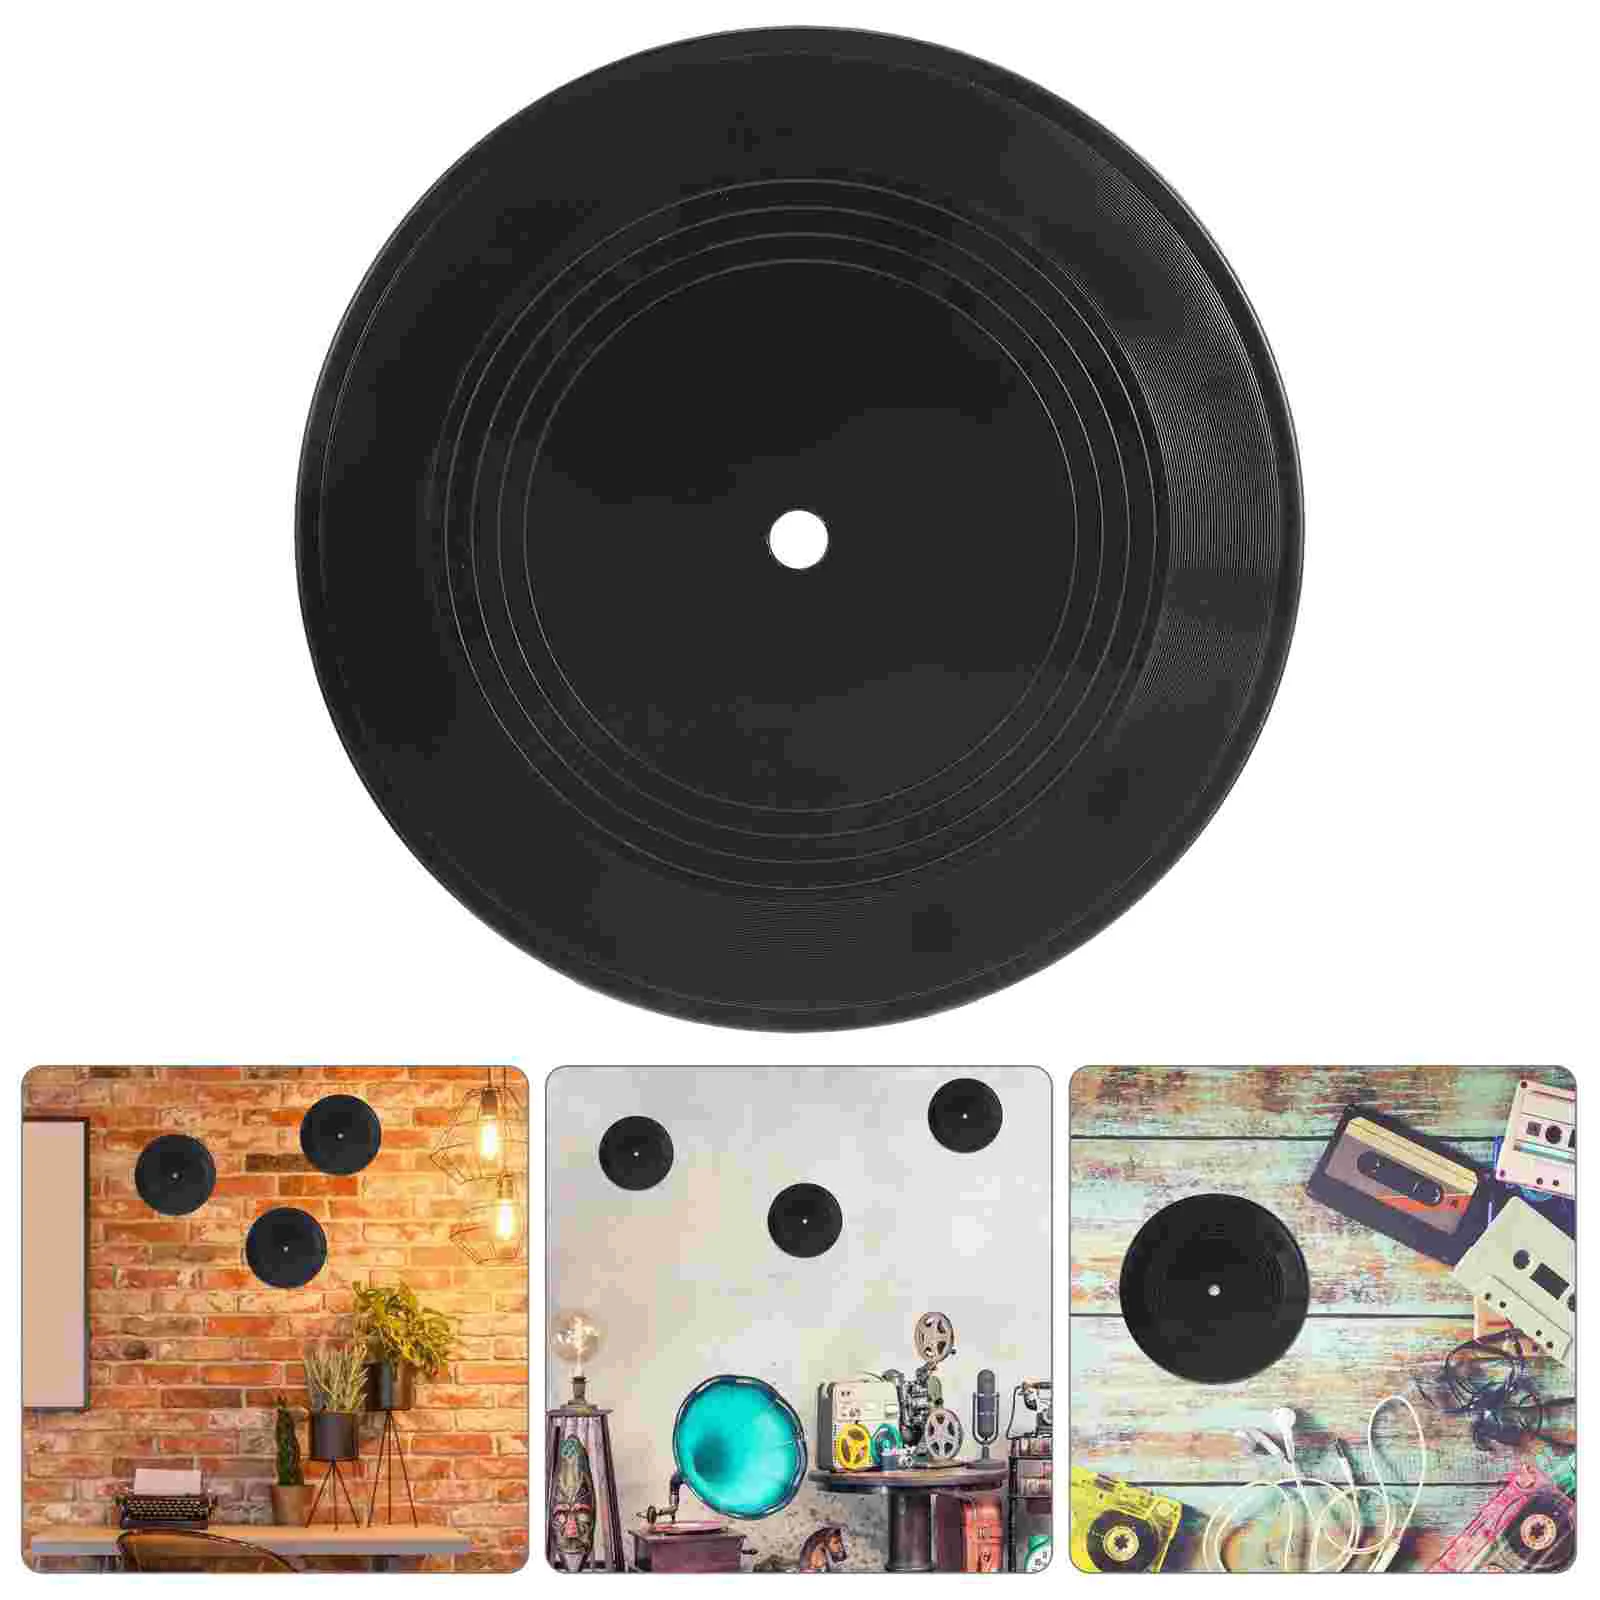 

Records Vinyl Decor Wall Record Vintage Decoration Decorations Music Party Room Theme Inch Crafts Blank Disco Ornaments Roll